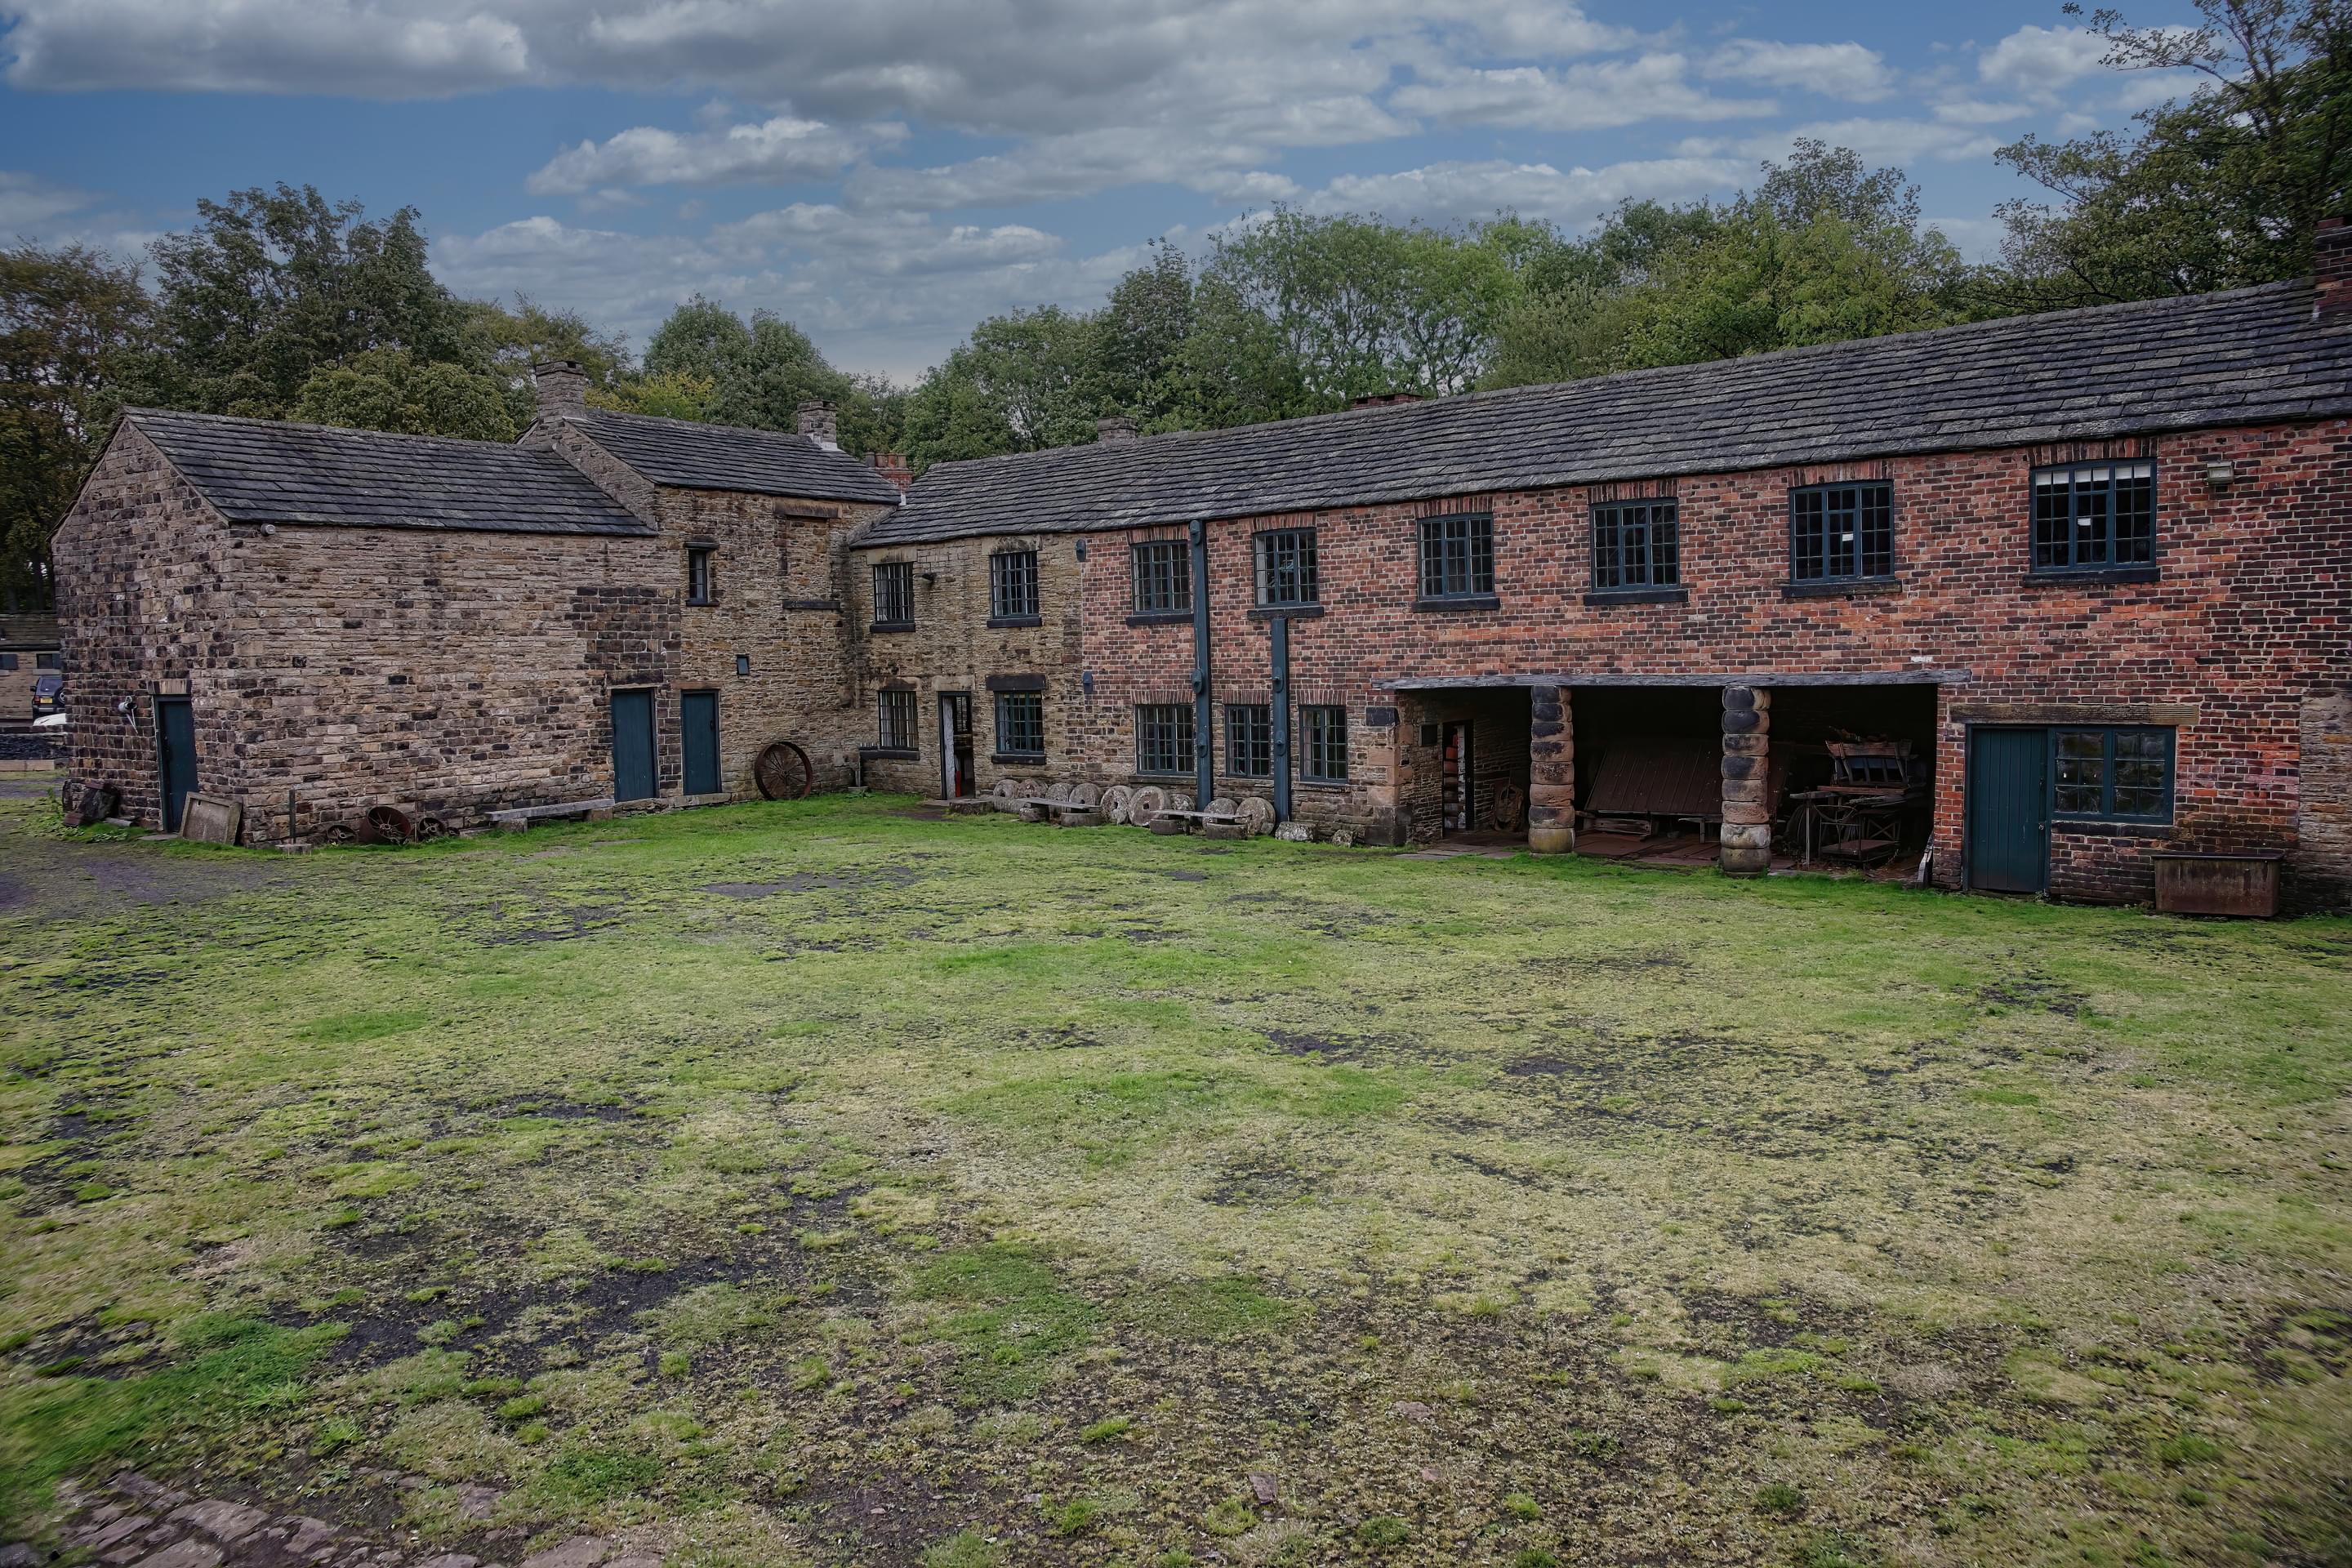 Abbeydale Industrial Hamlet Overview